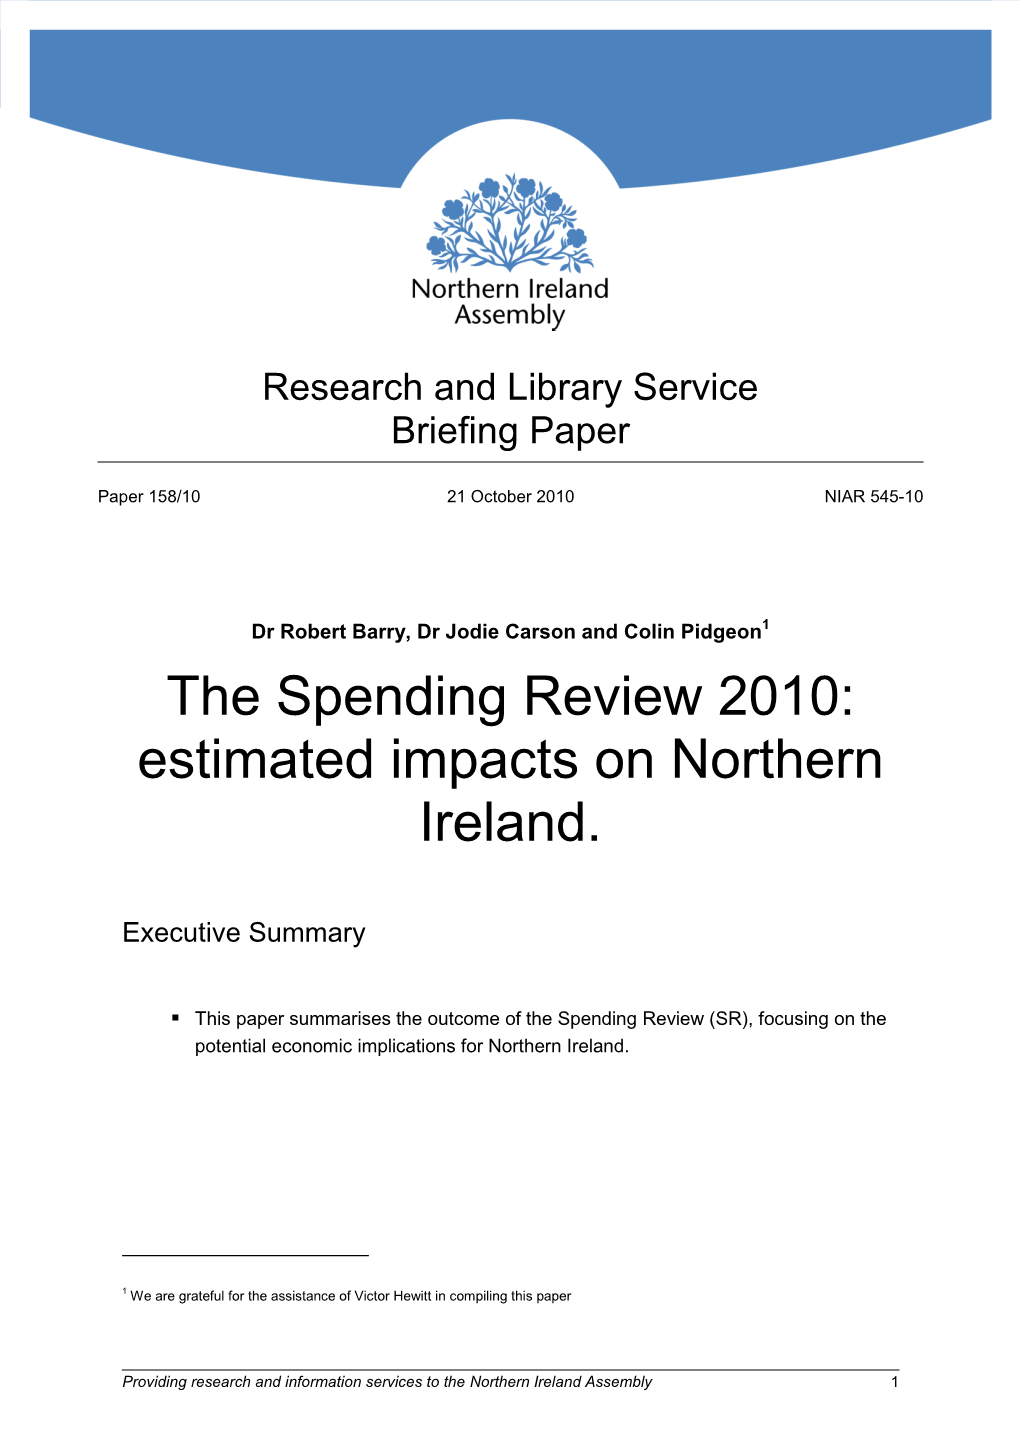 The Comprehensive Spending Review 2010